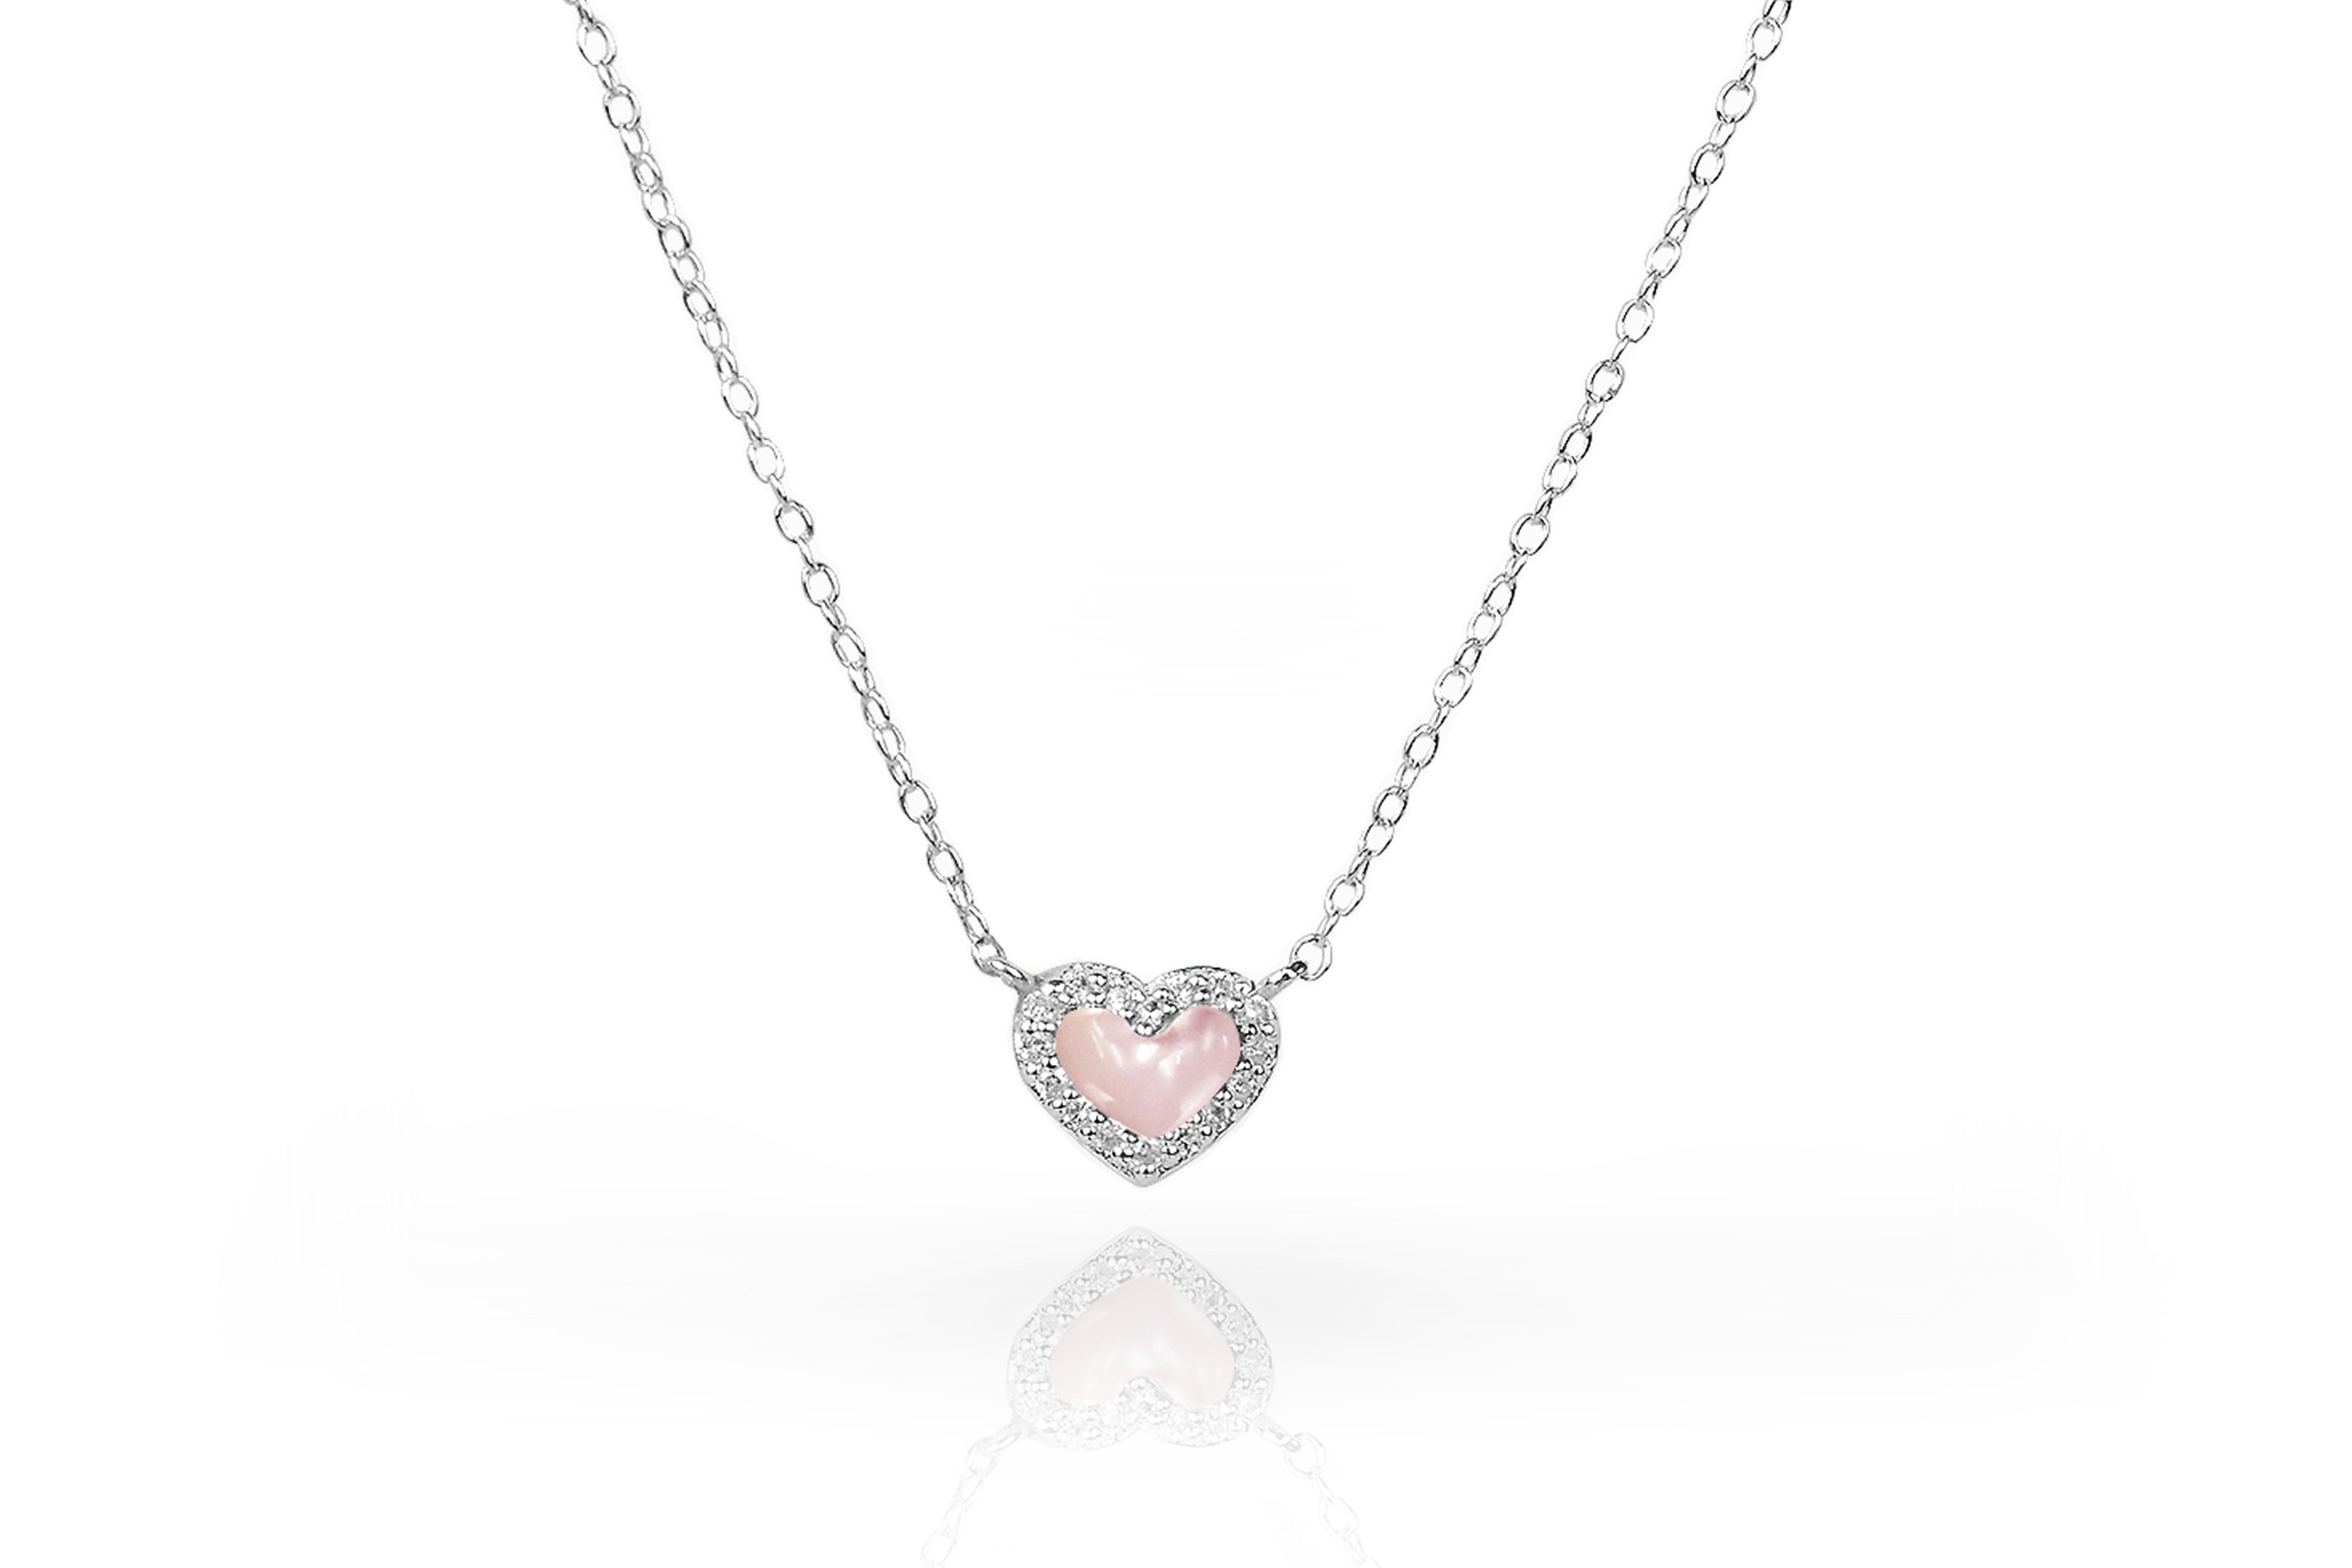 Gemstone Heart Necklace 6.59 mm. x 8.15 mm. is made of 10k solid gold available in three colors of gold and four options of gemstone.
Gold: White Gold / Rose Gold / Yellow Gold.
Gemstone: Abalone / Tahitian Black MOP / White MOP / Pink MOP

Delicate